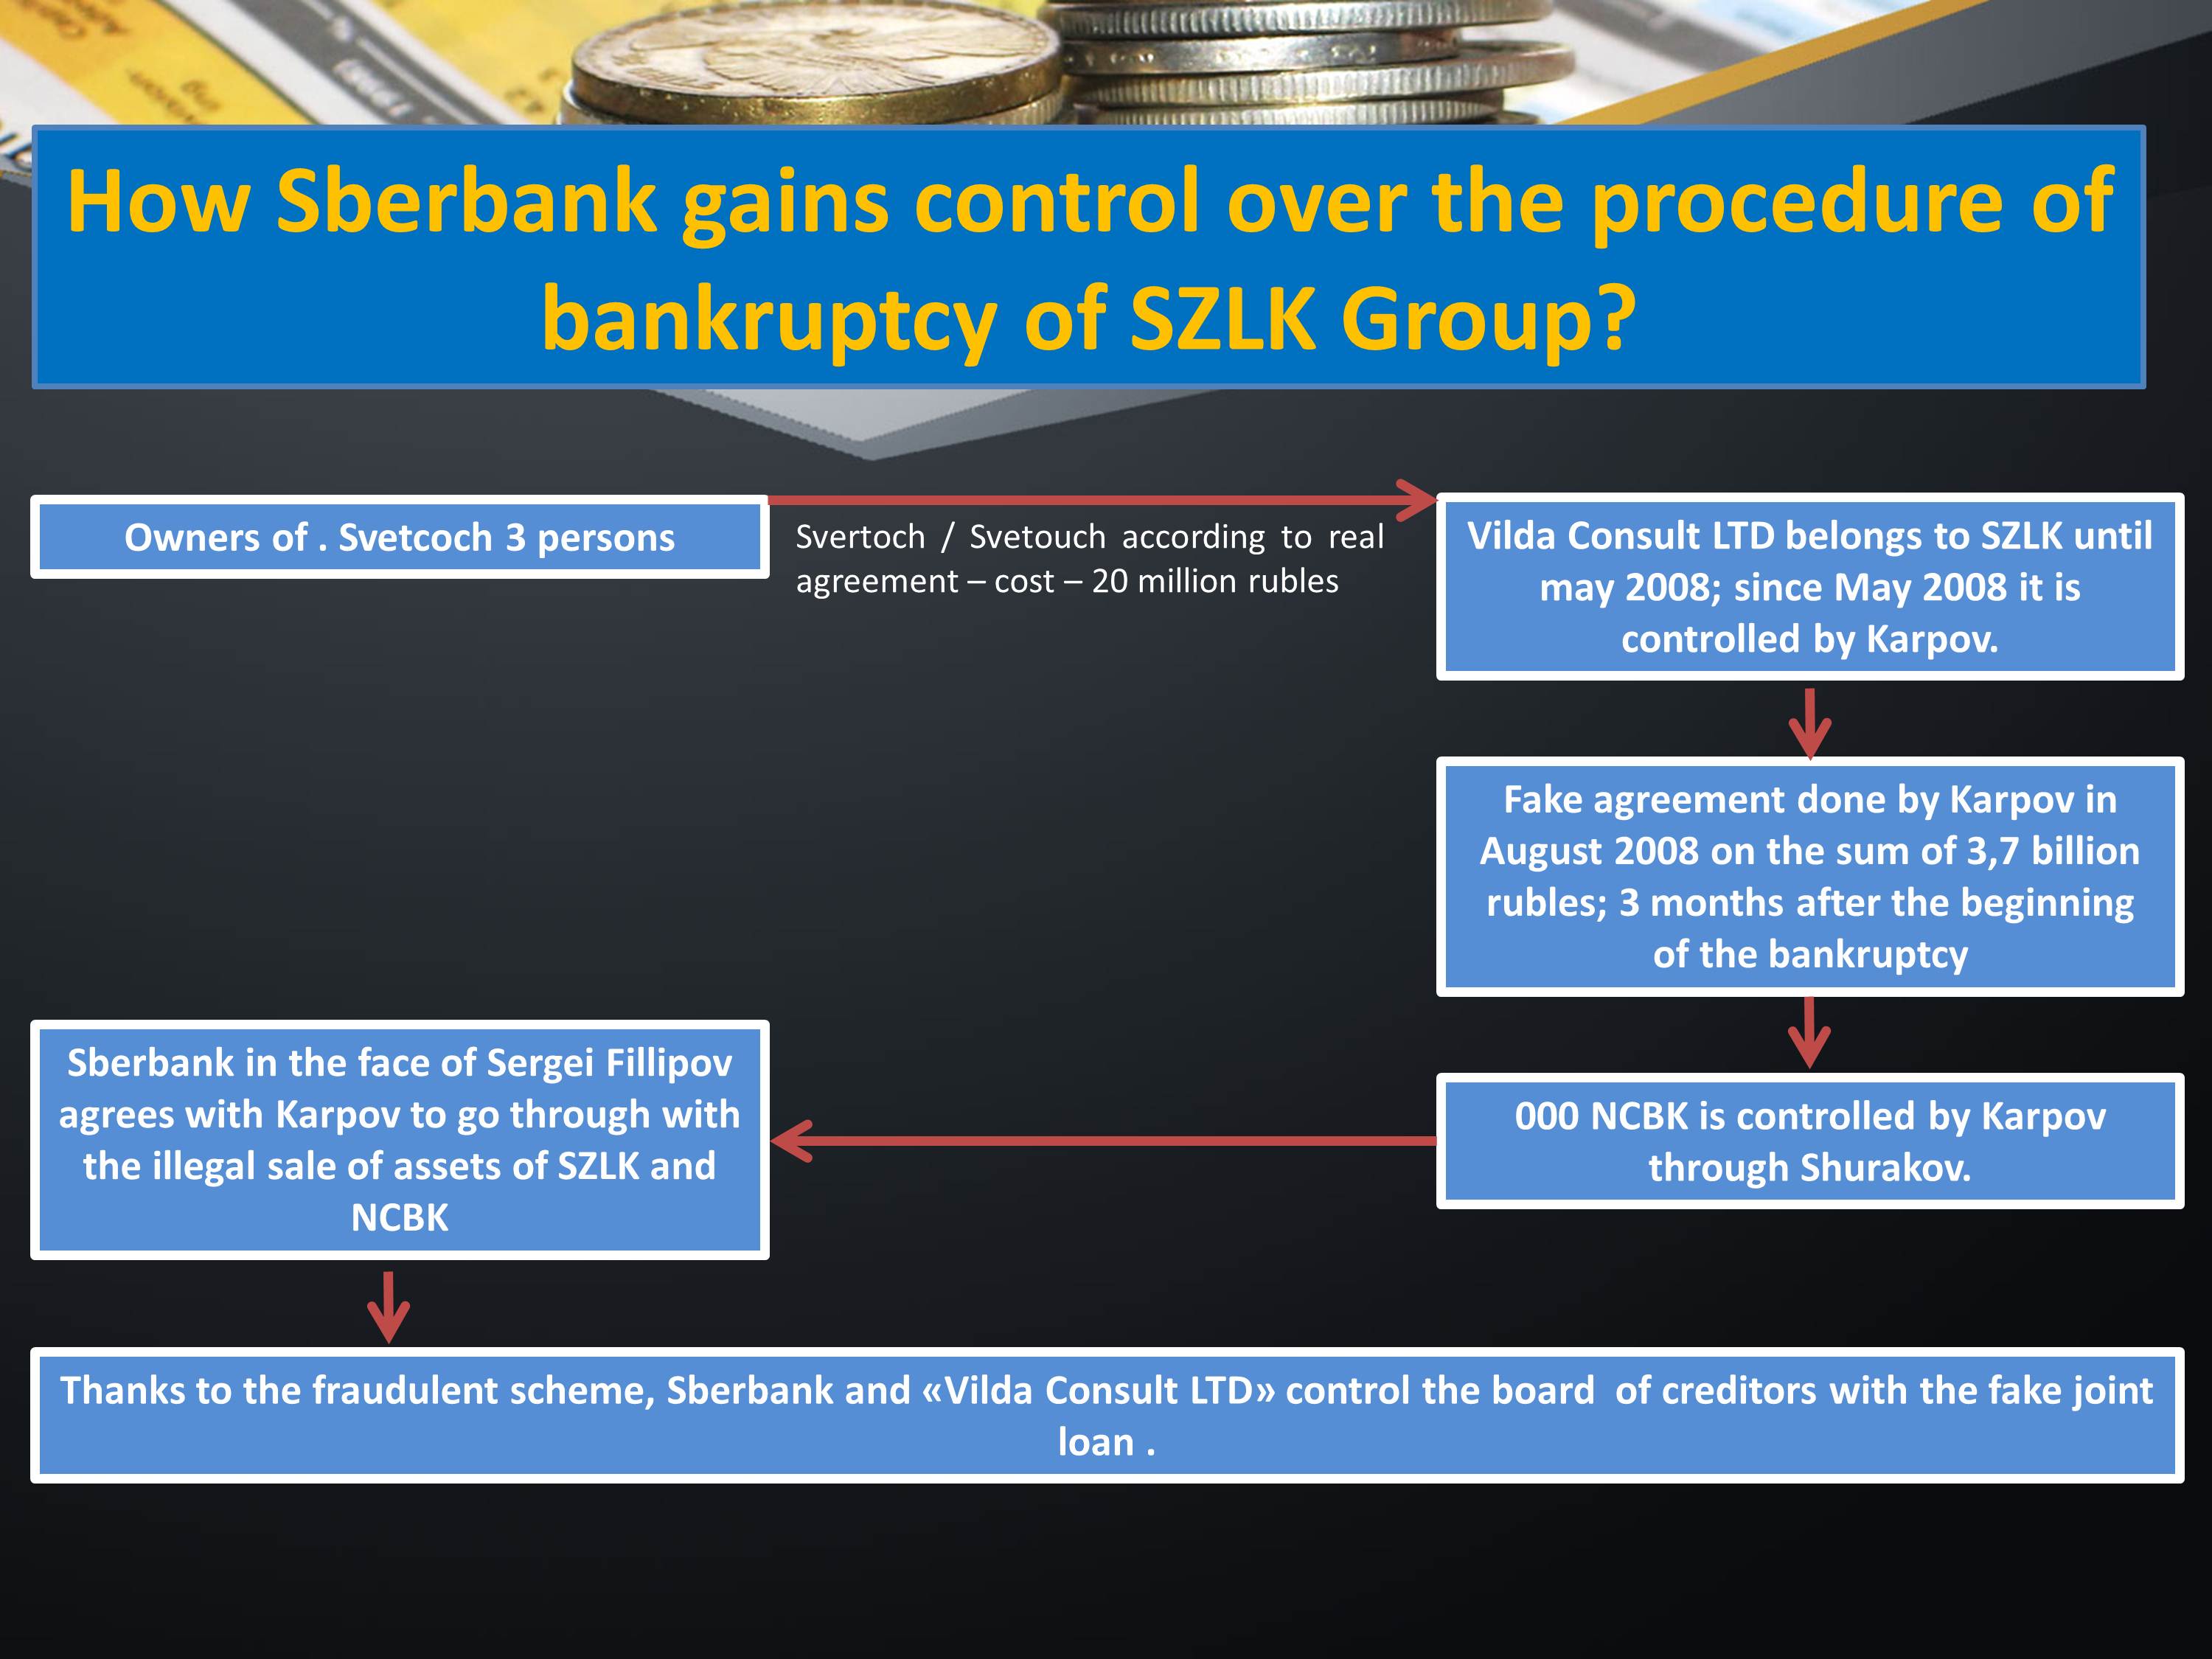 12 How Sberbank gains control over the procedure of bankruptcy of SZLK Group - supportthebitkovs.com